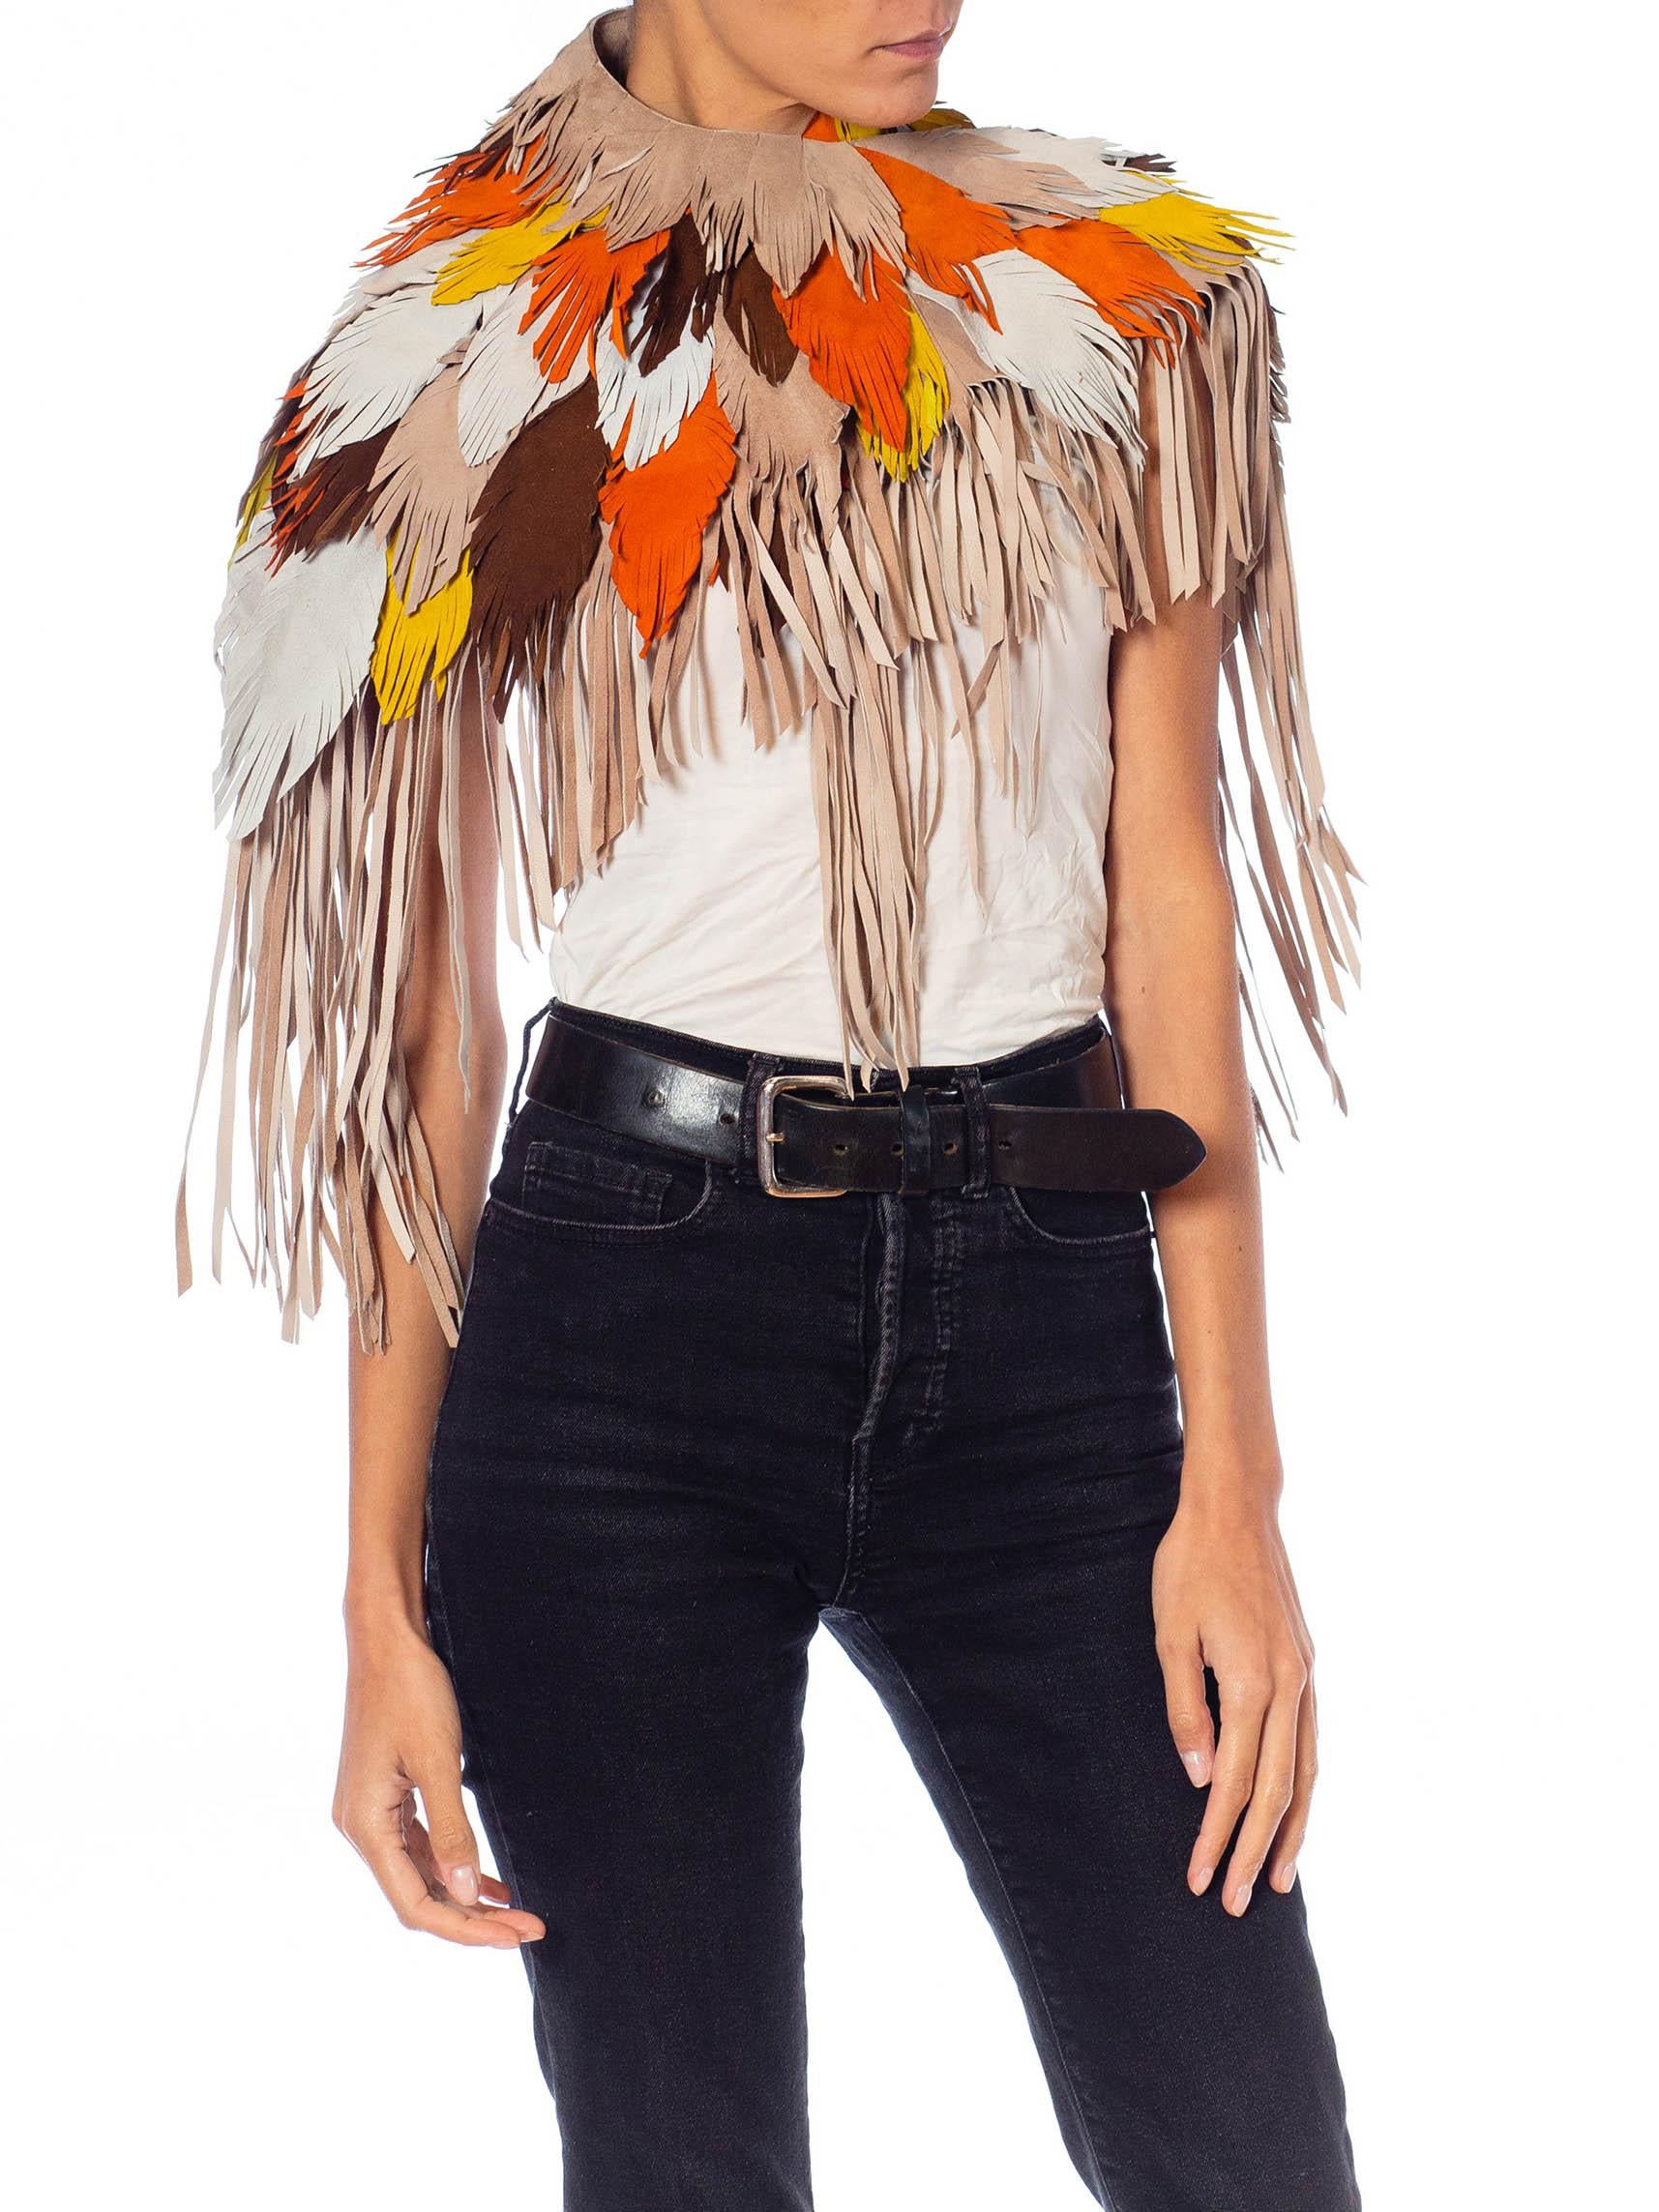 MORPHEW COLLECTION Phoenix Sunset Suede Fringe Feather Leather Cape For Sale 1